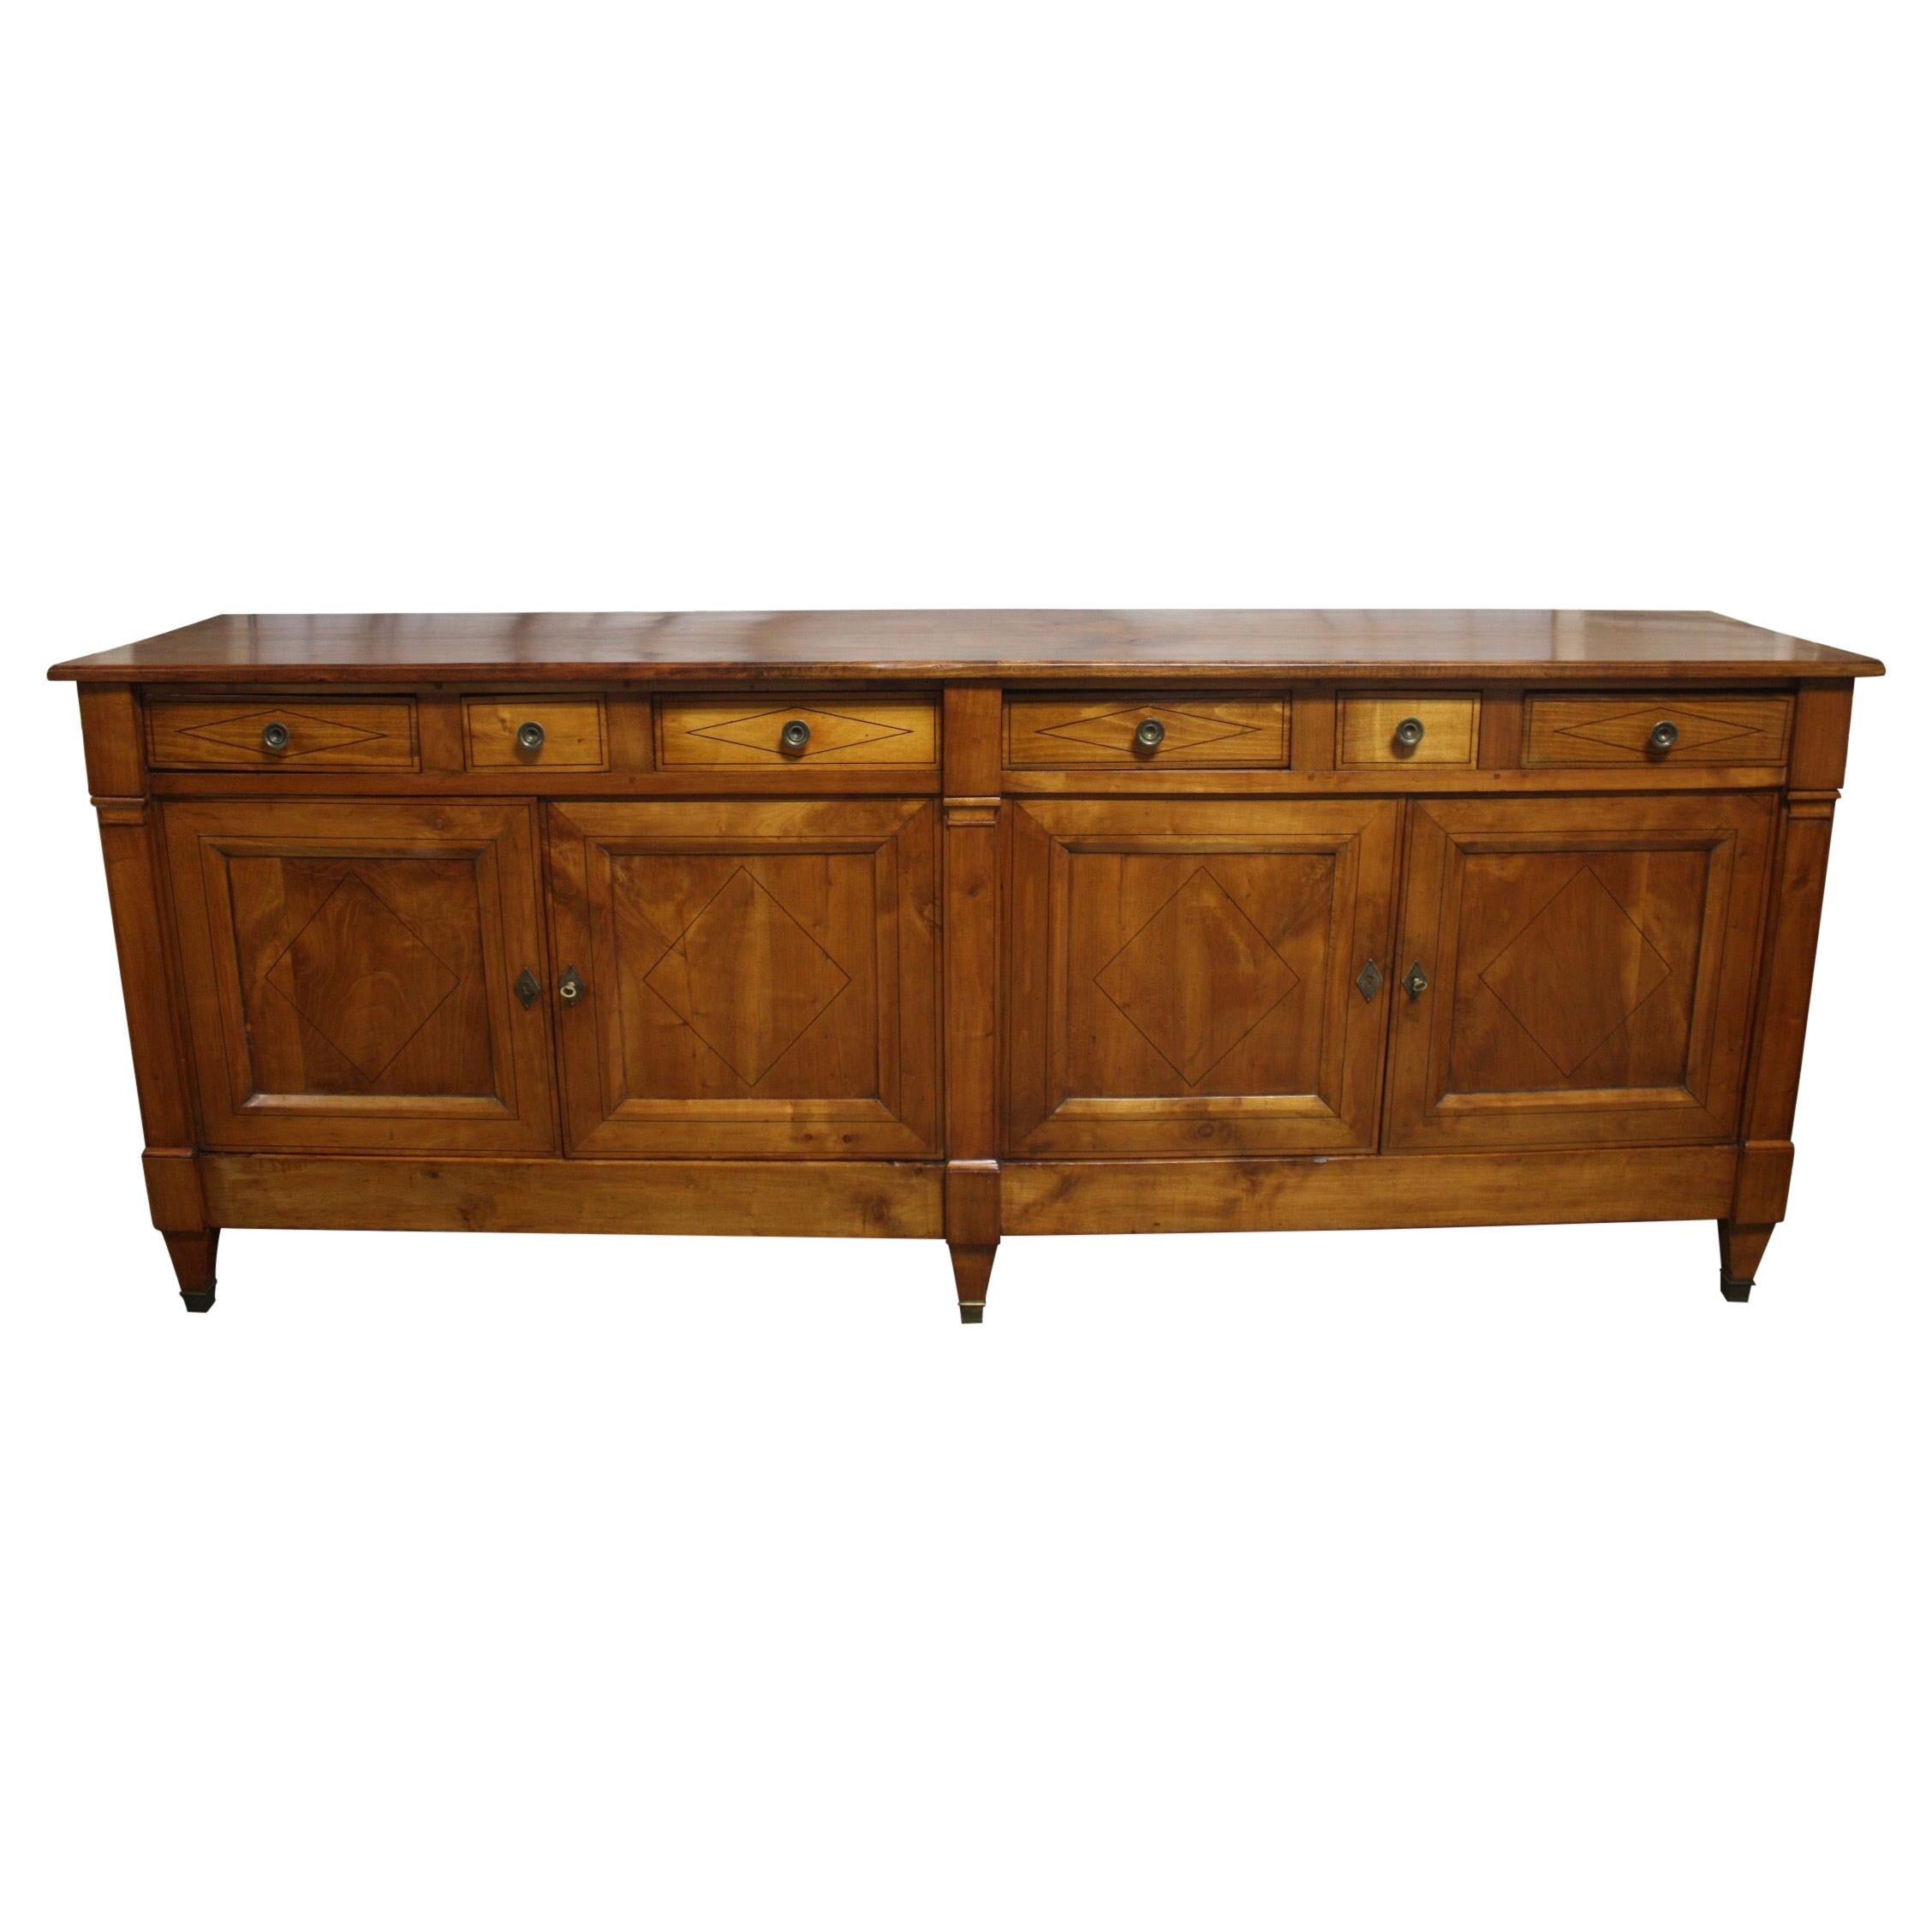 Magnificent French Directoire Period Sideboard